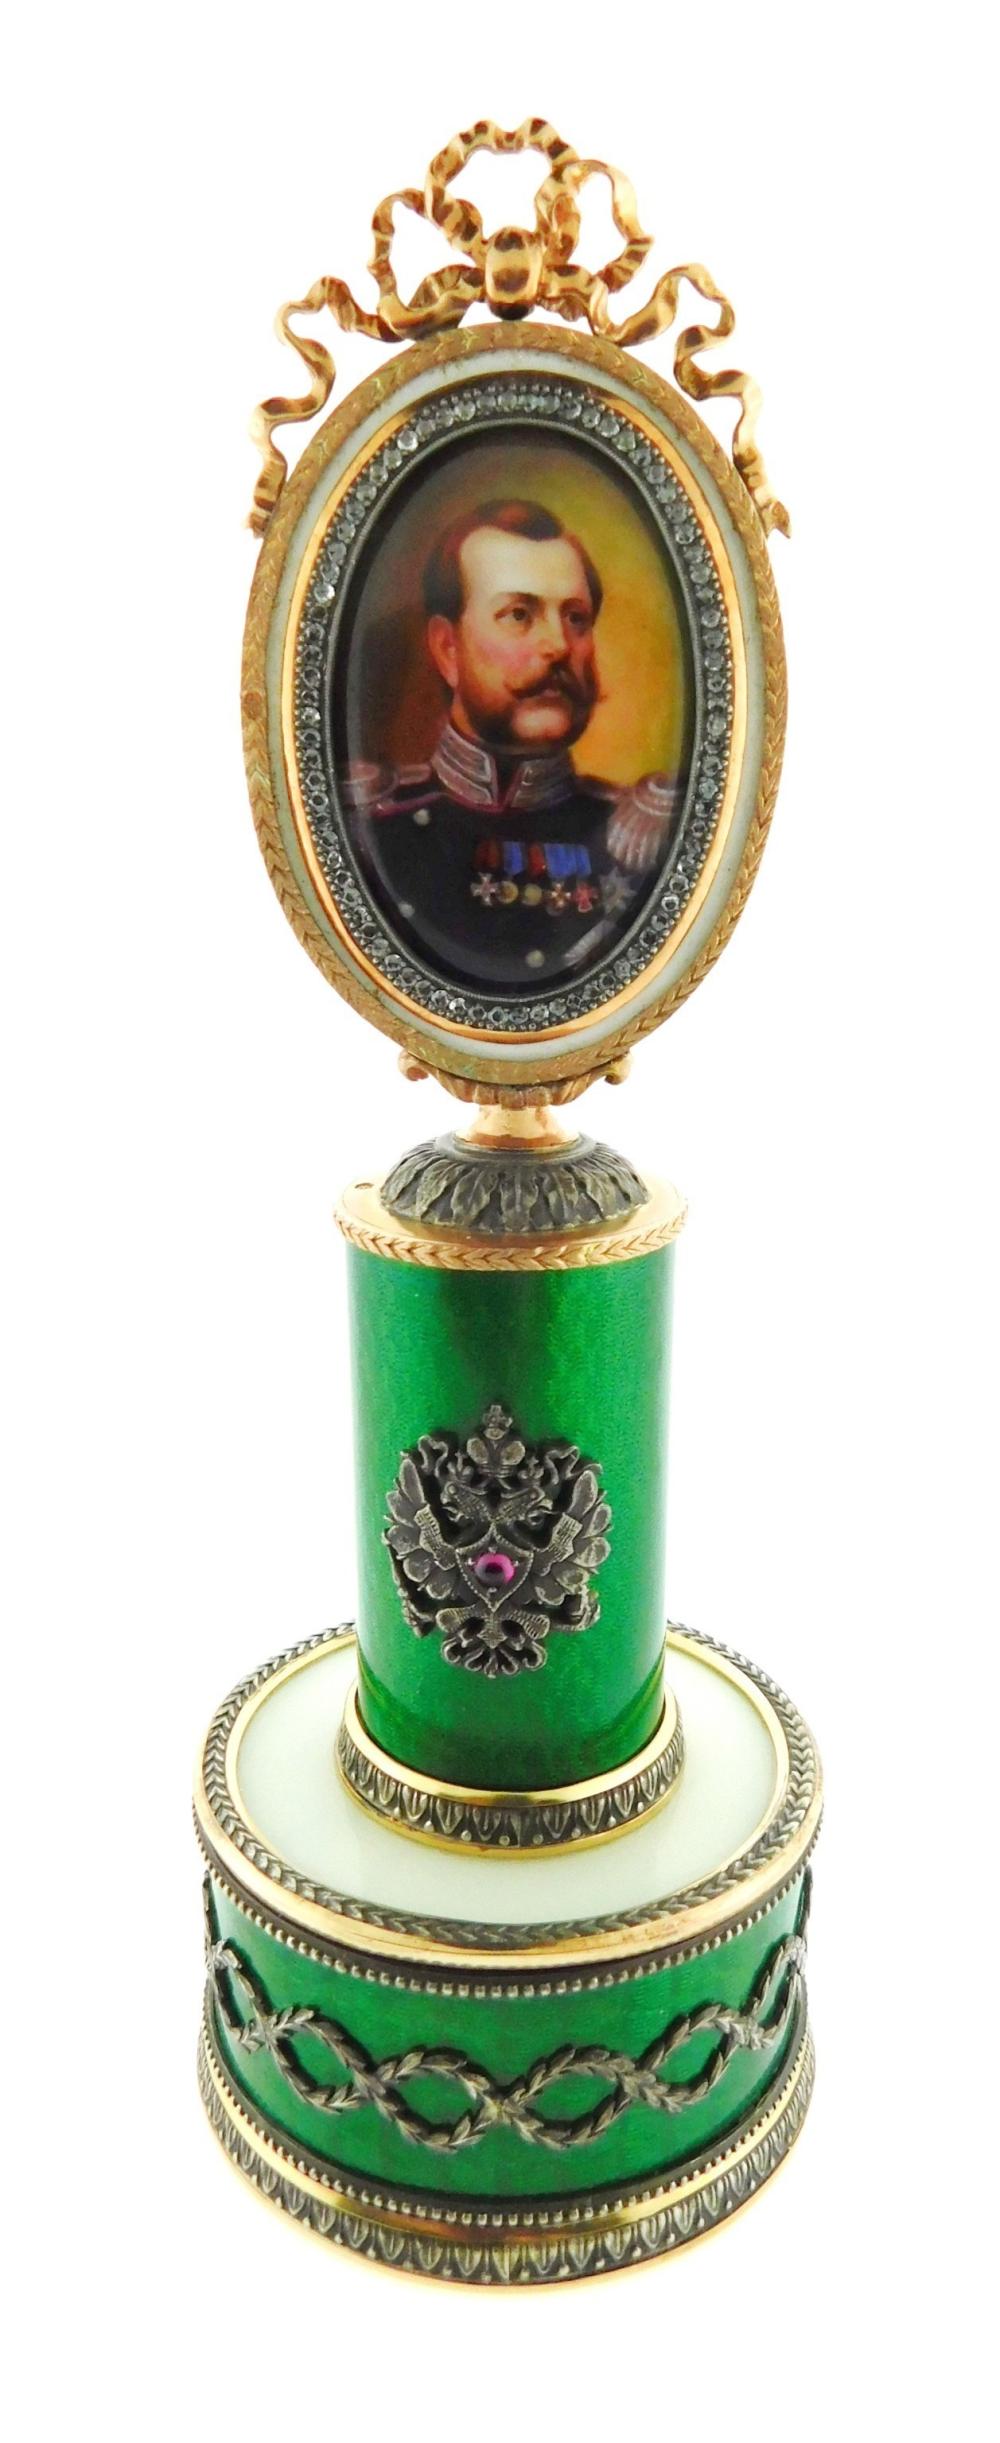 FABERGE STYLE MINIATURE PAINTING